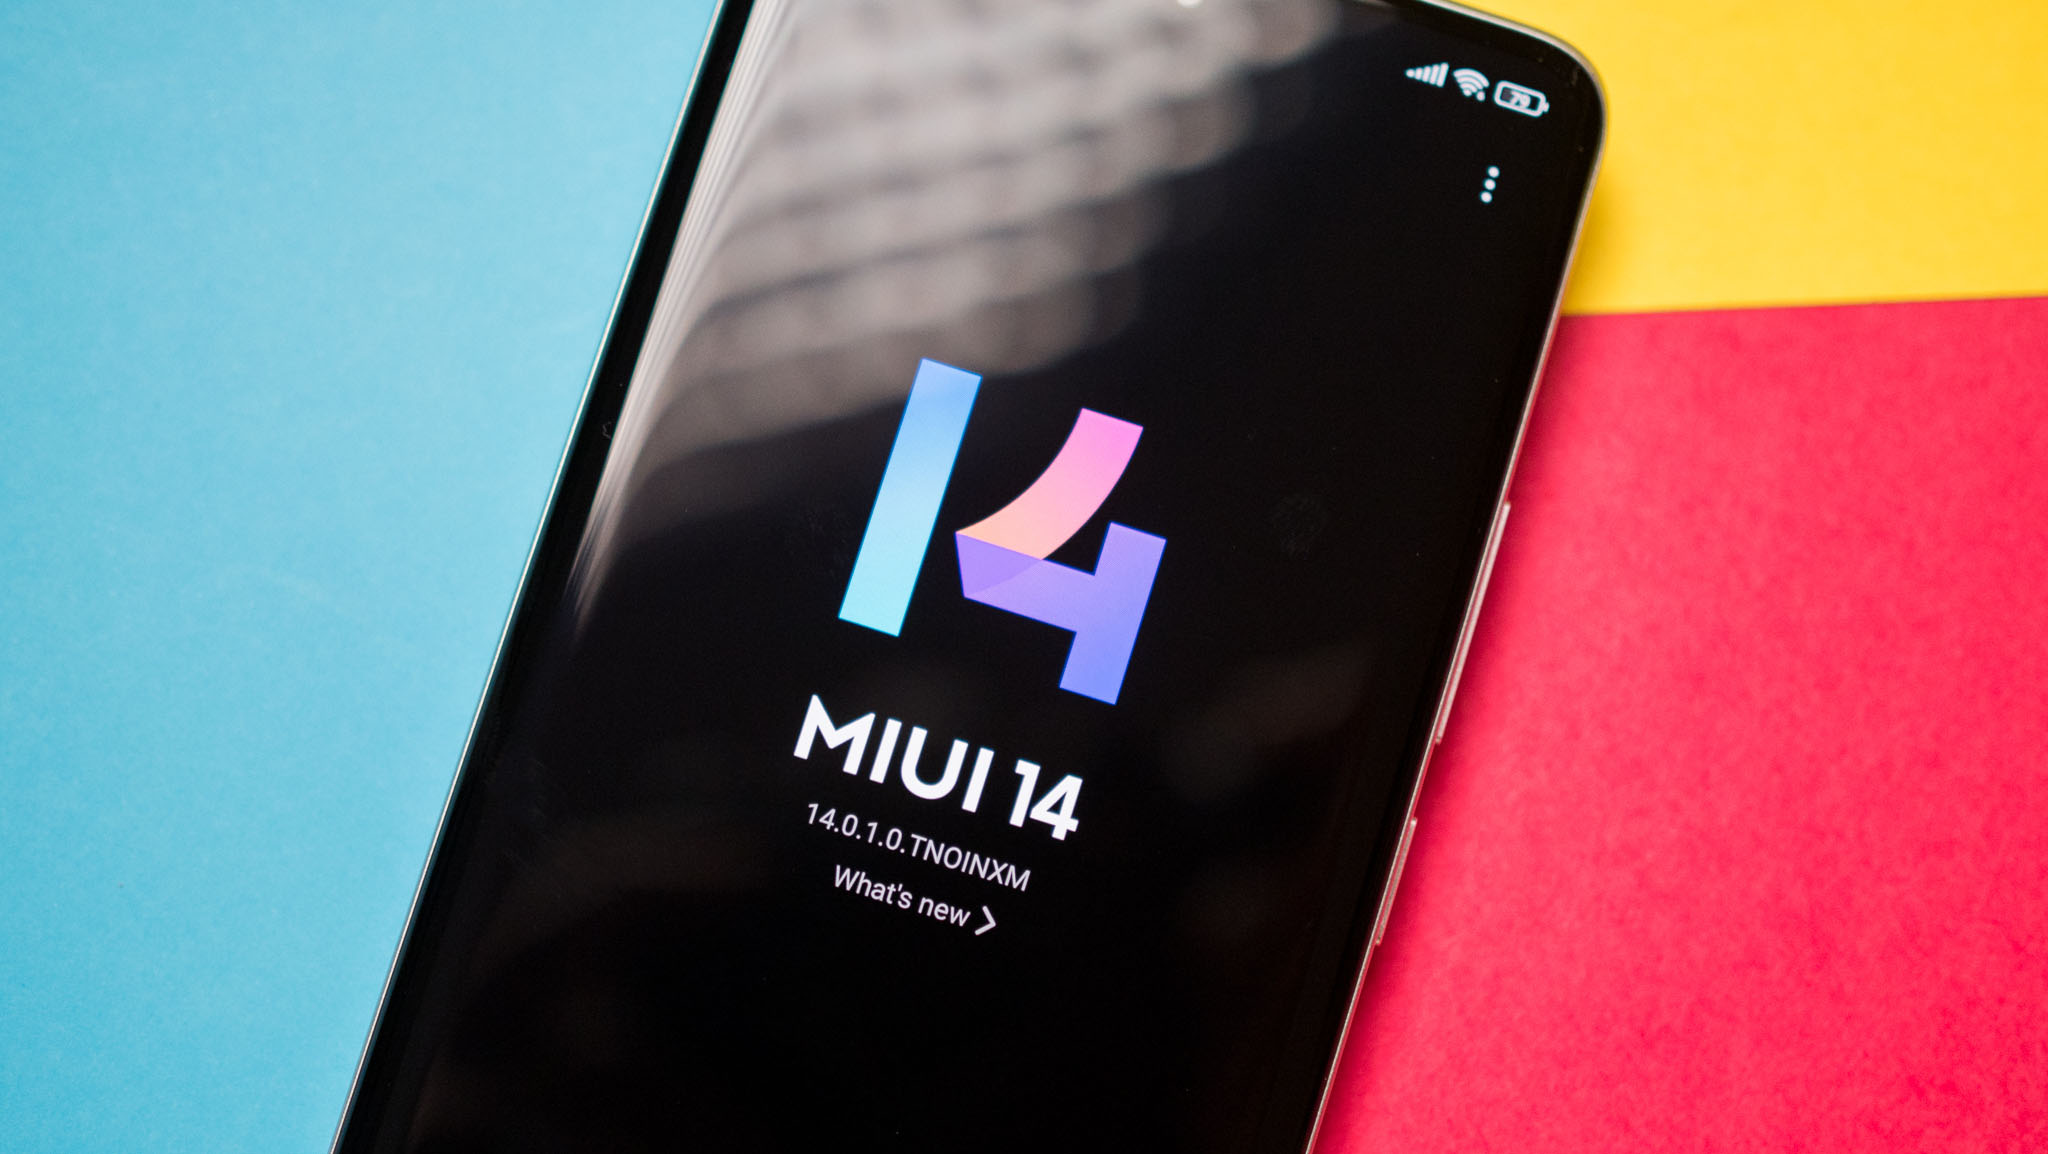 MIUI 14 about screen on Redmi Note 13 Pro Plus